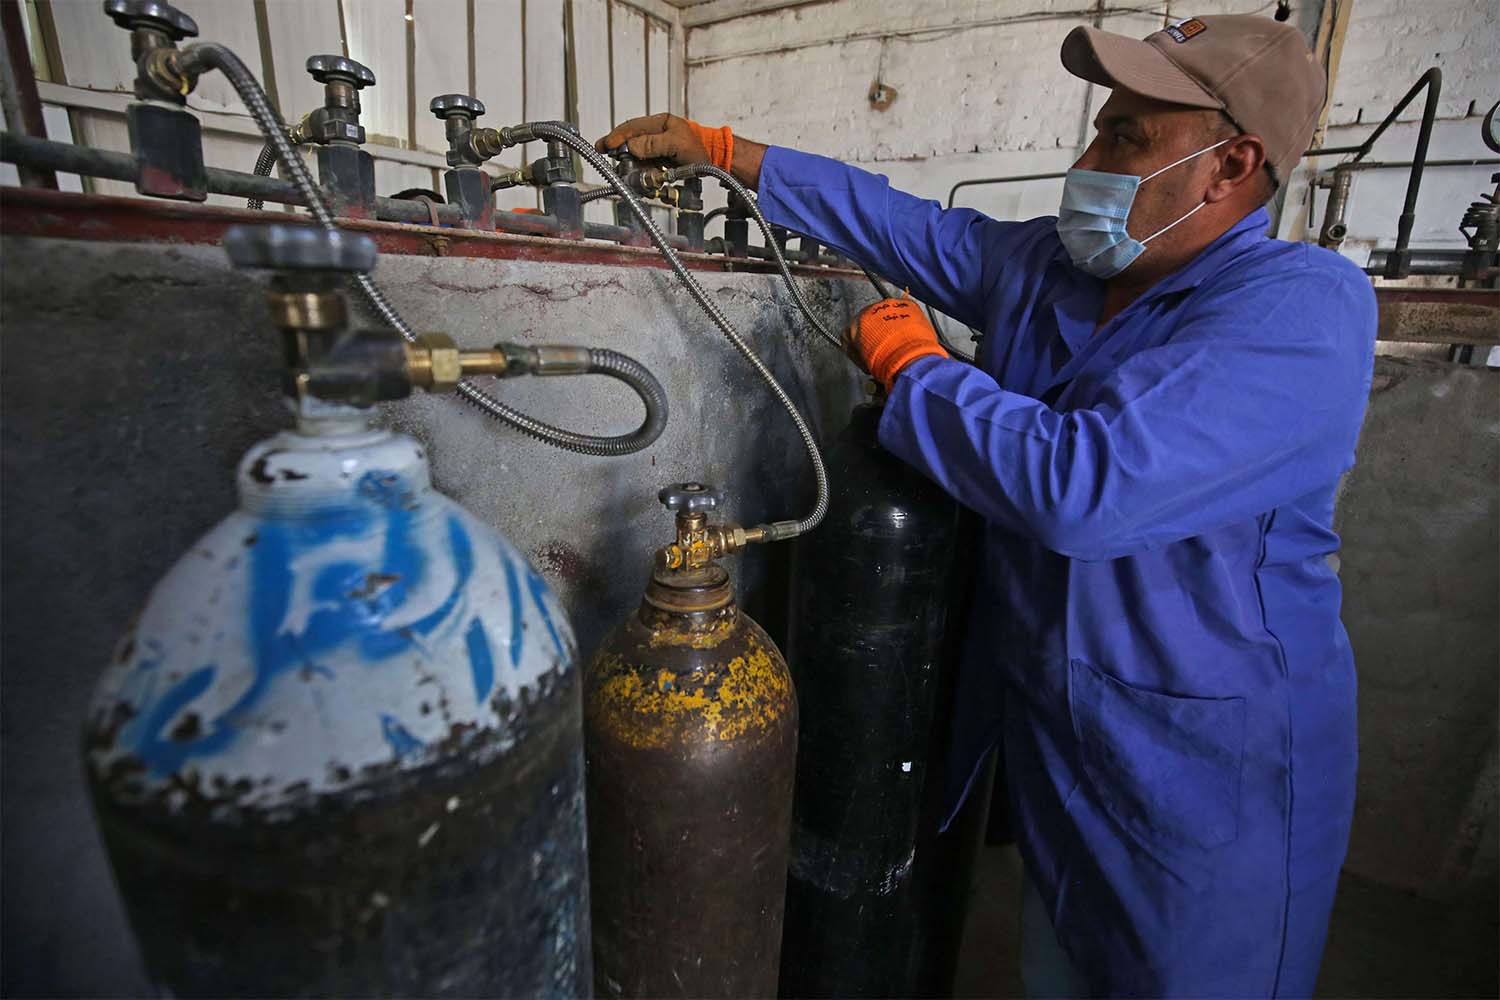 Health centres are facing shortages of oxygen supplies and personal protective equipment across Iraq